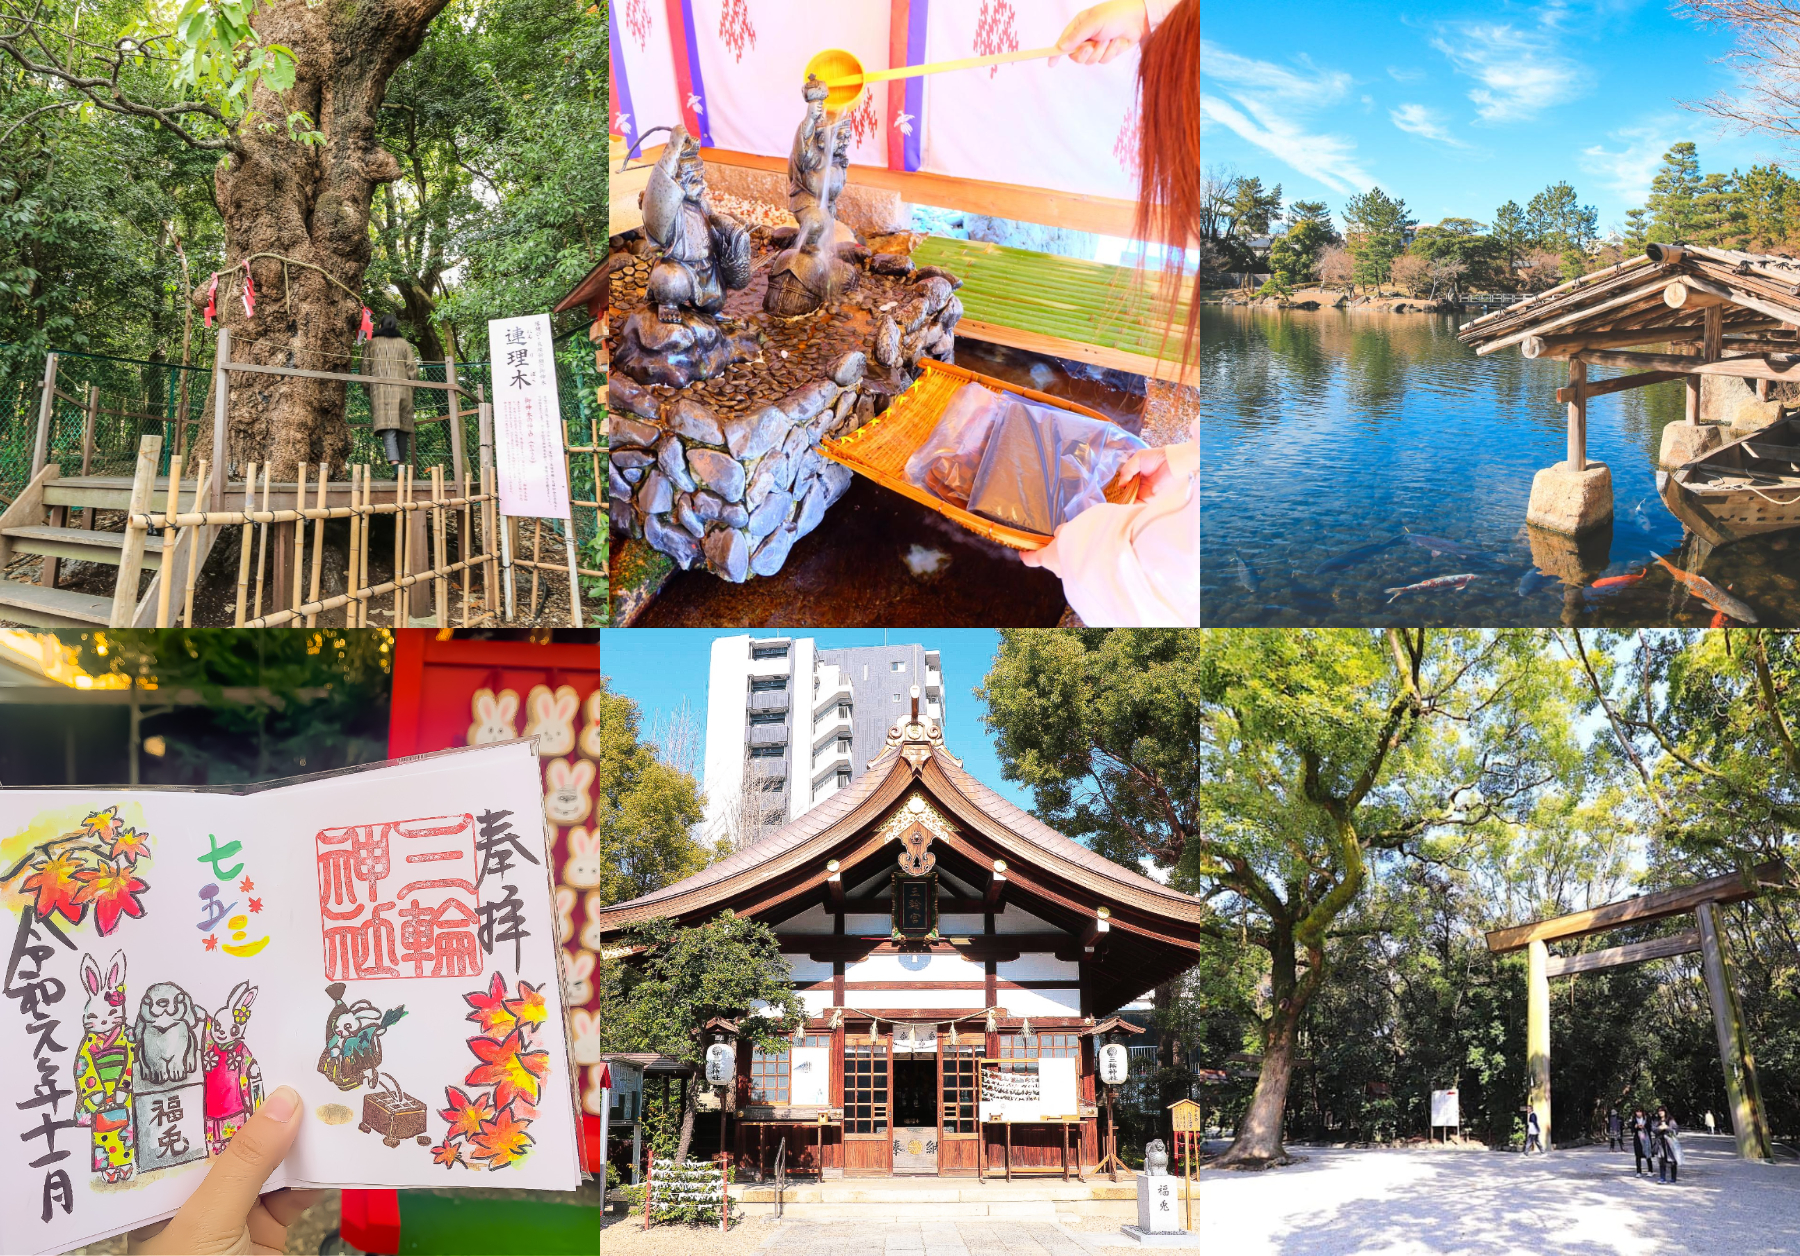 【Top 10 】Power Spots (Spiritual Place) to Visit in Nagoya!